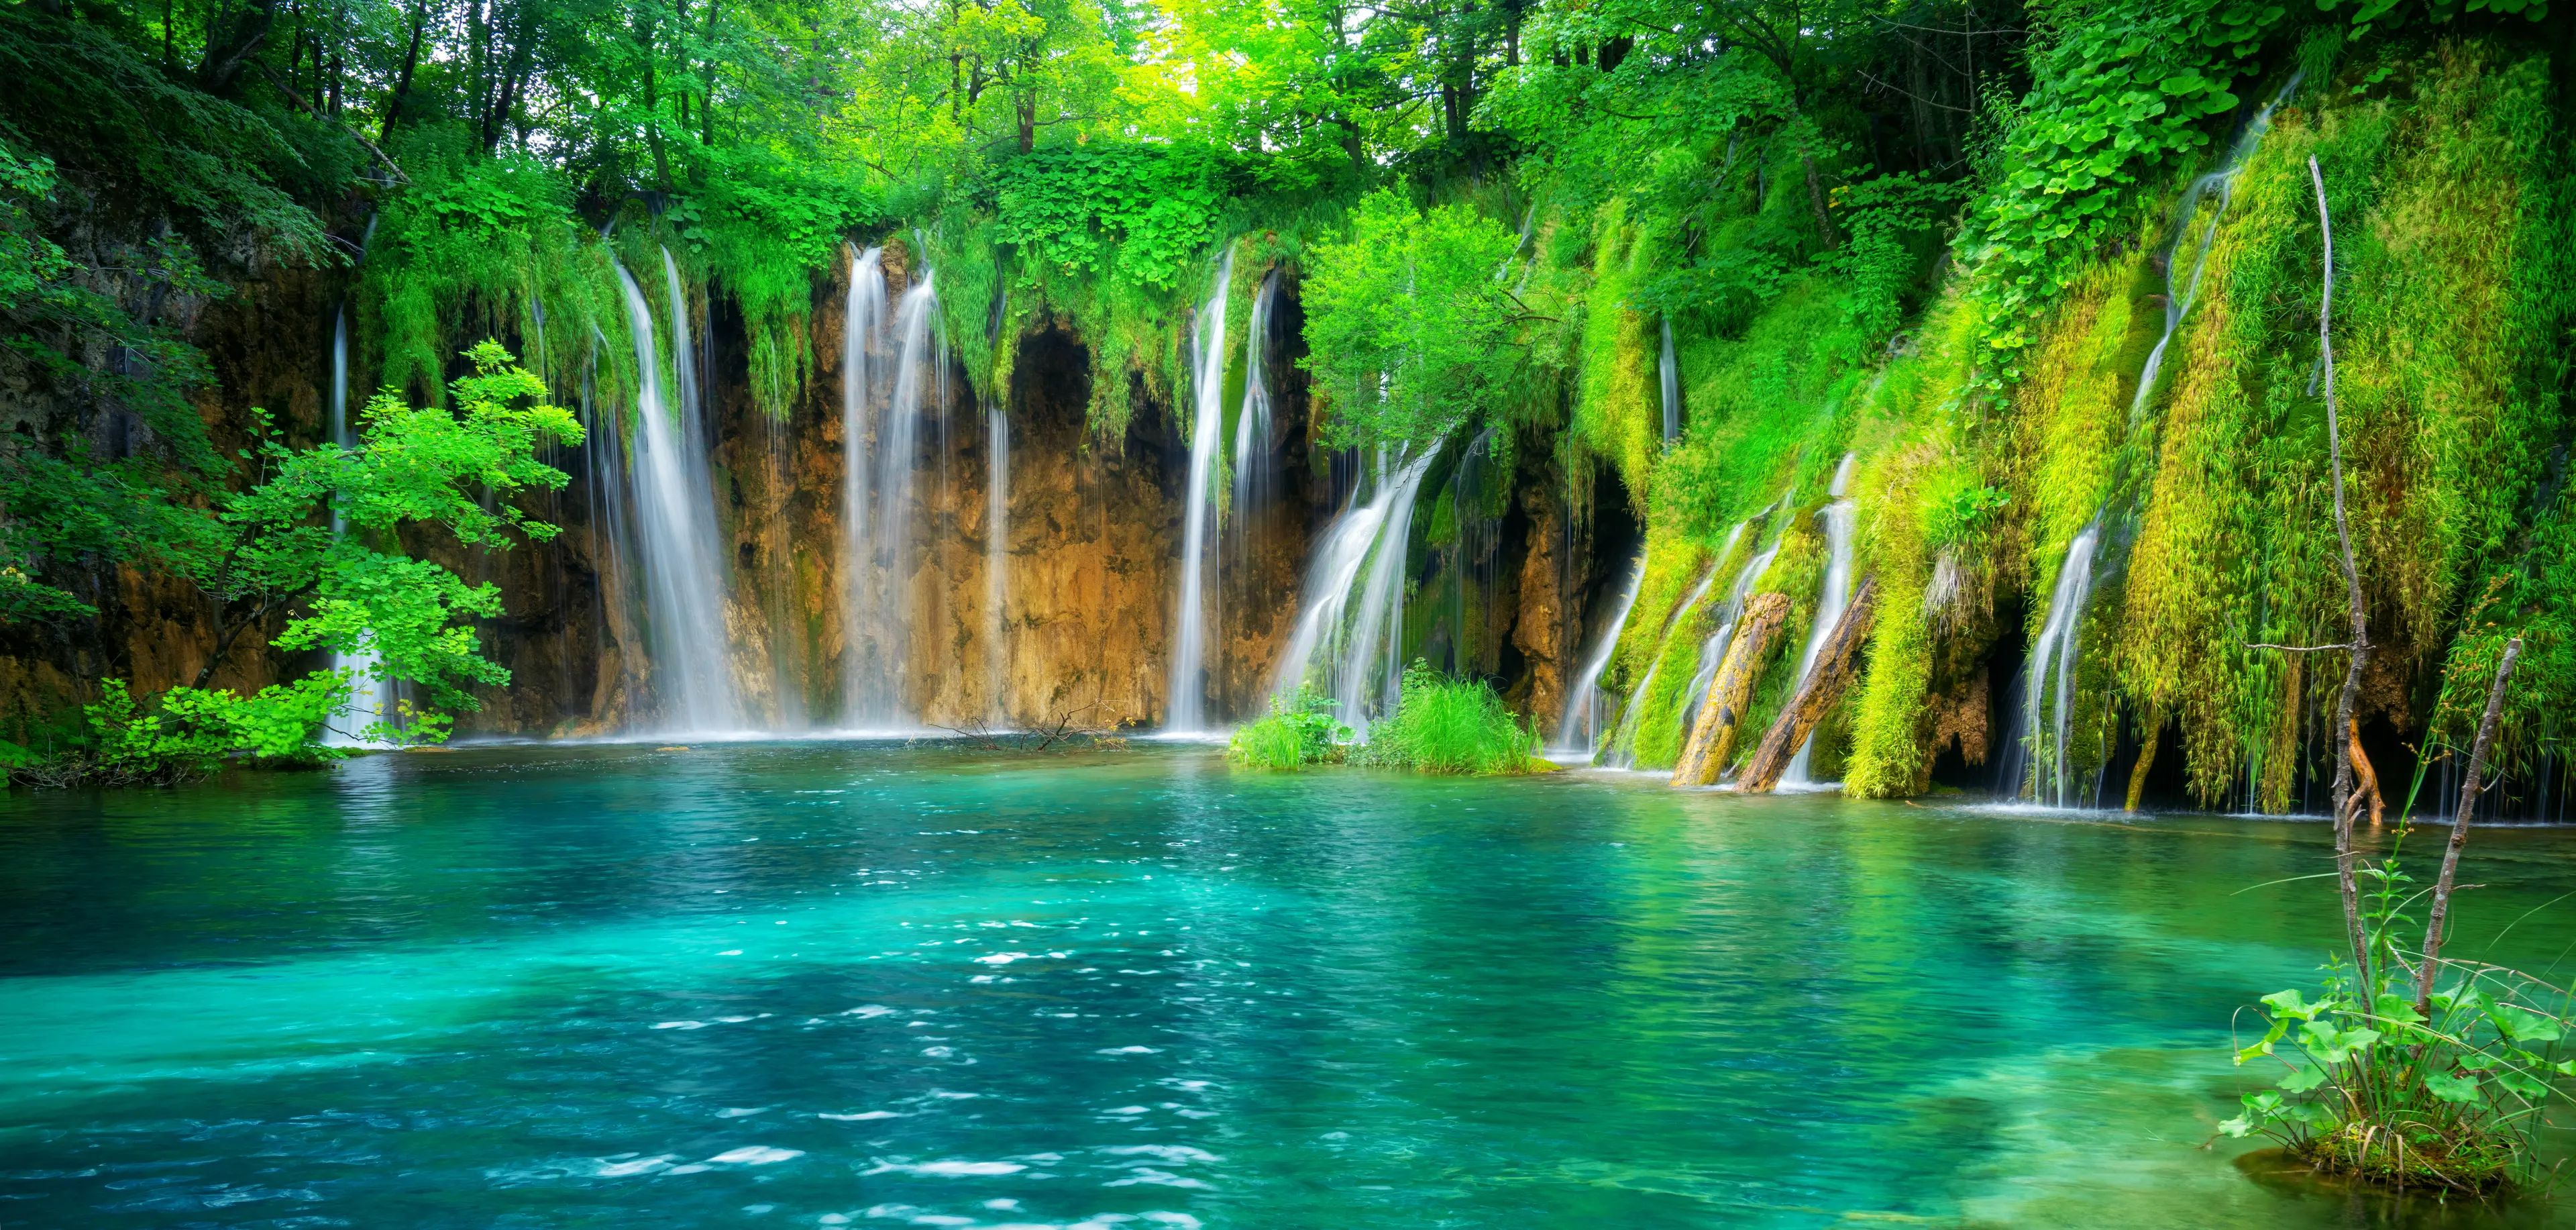 1-Day Family Adventure at Plitvice Lakes for Croatian Locals